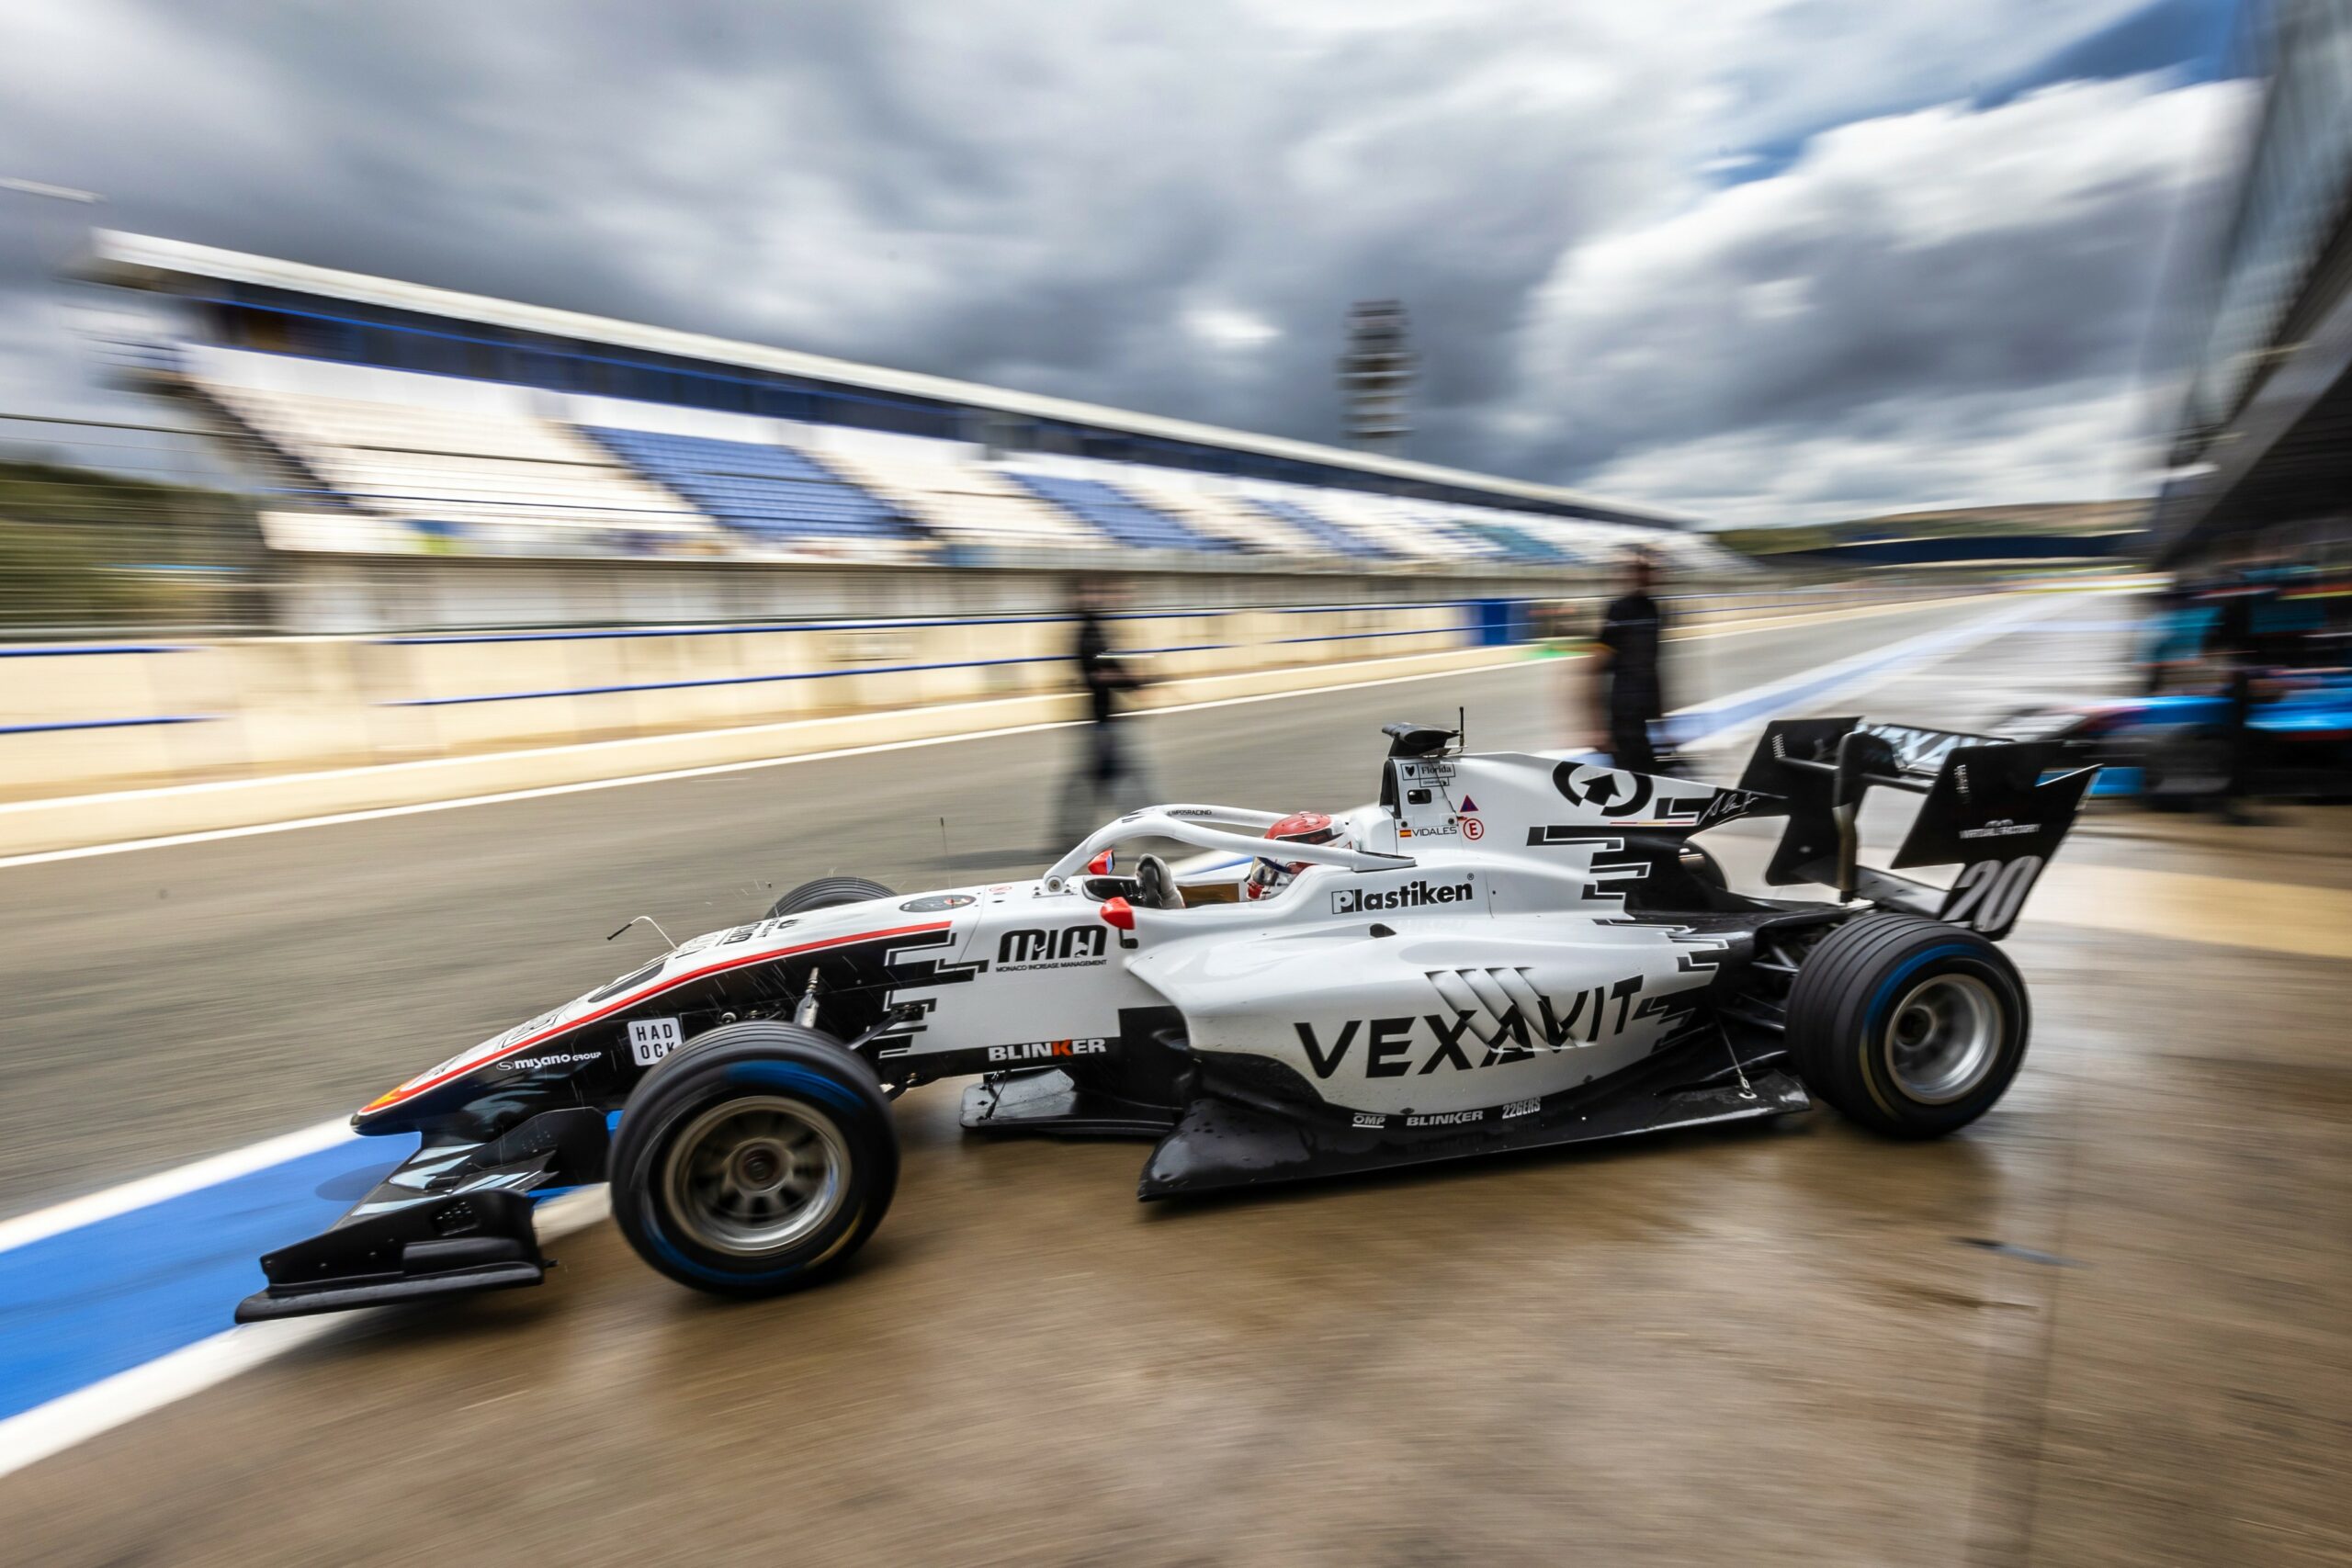 Strong pace for Vidales in Jerez F3 test